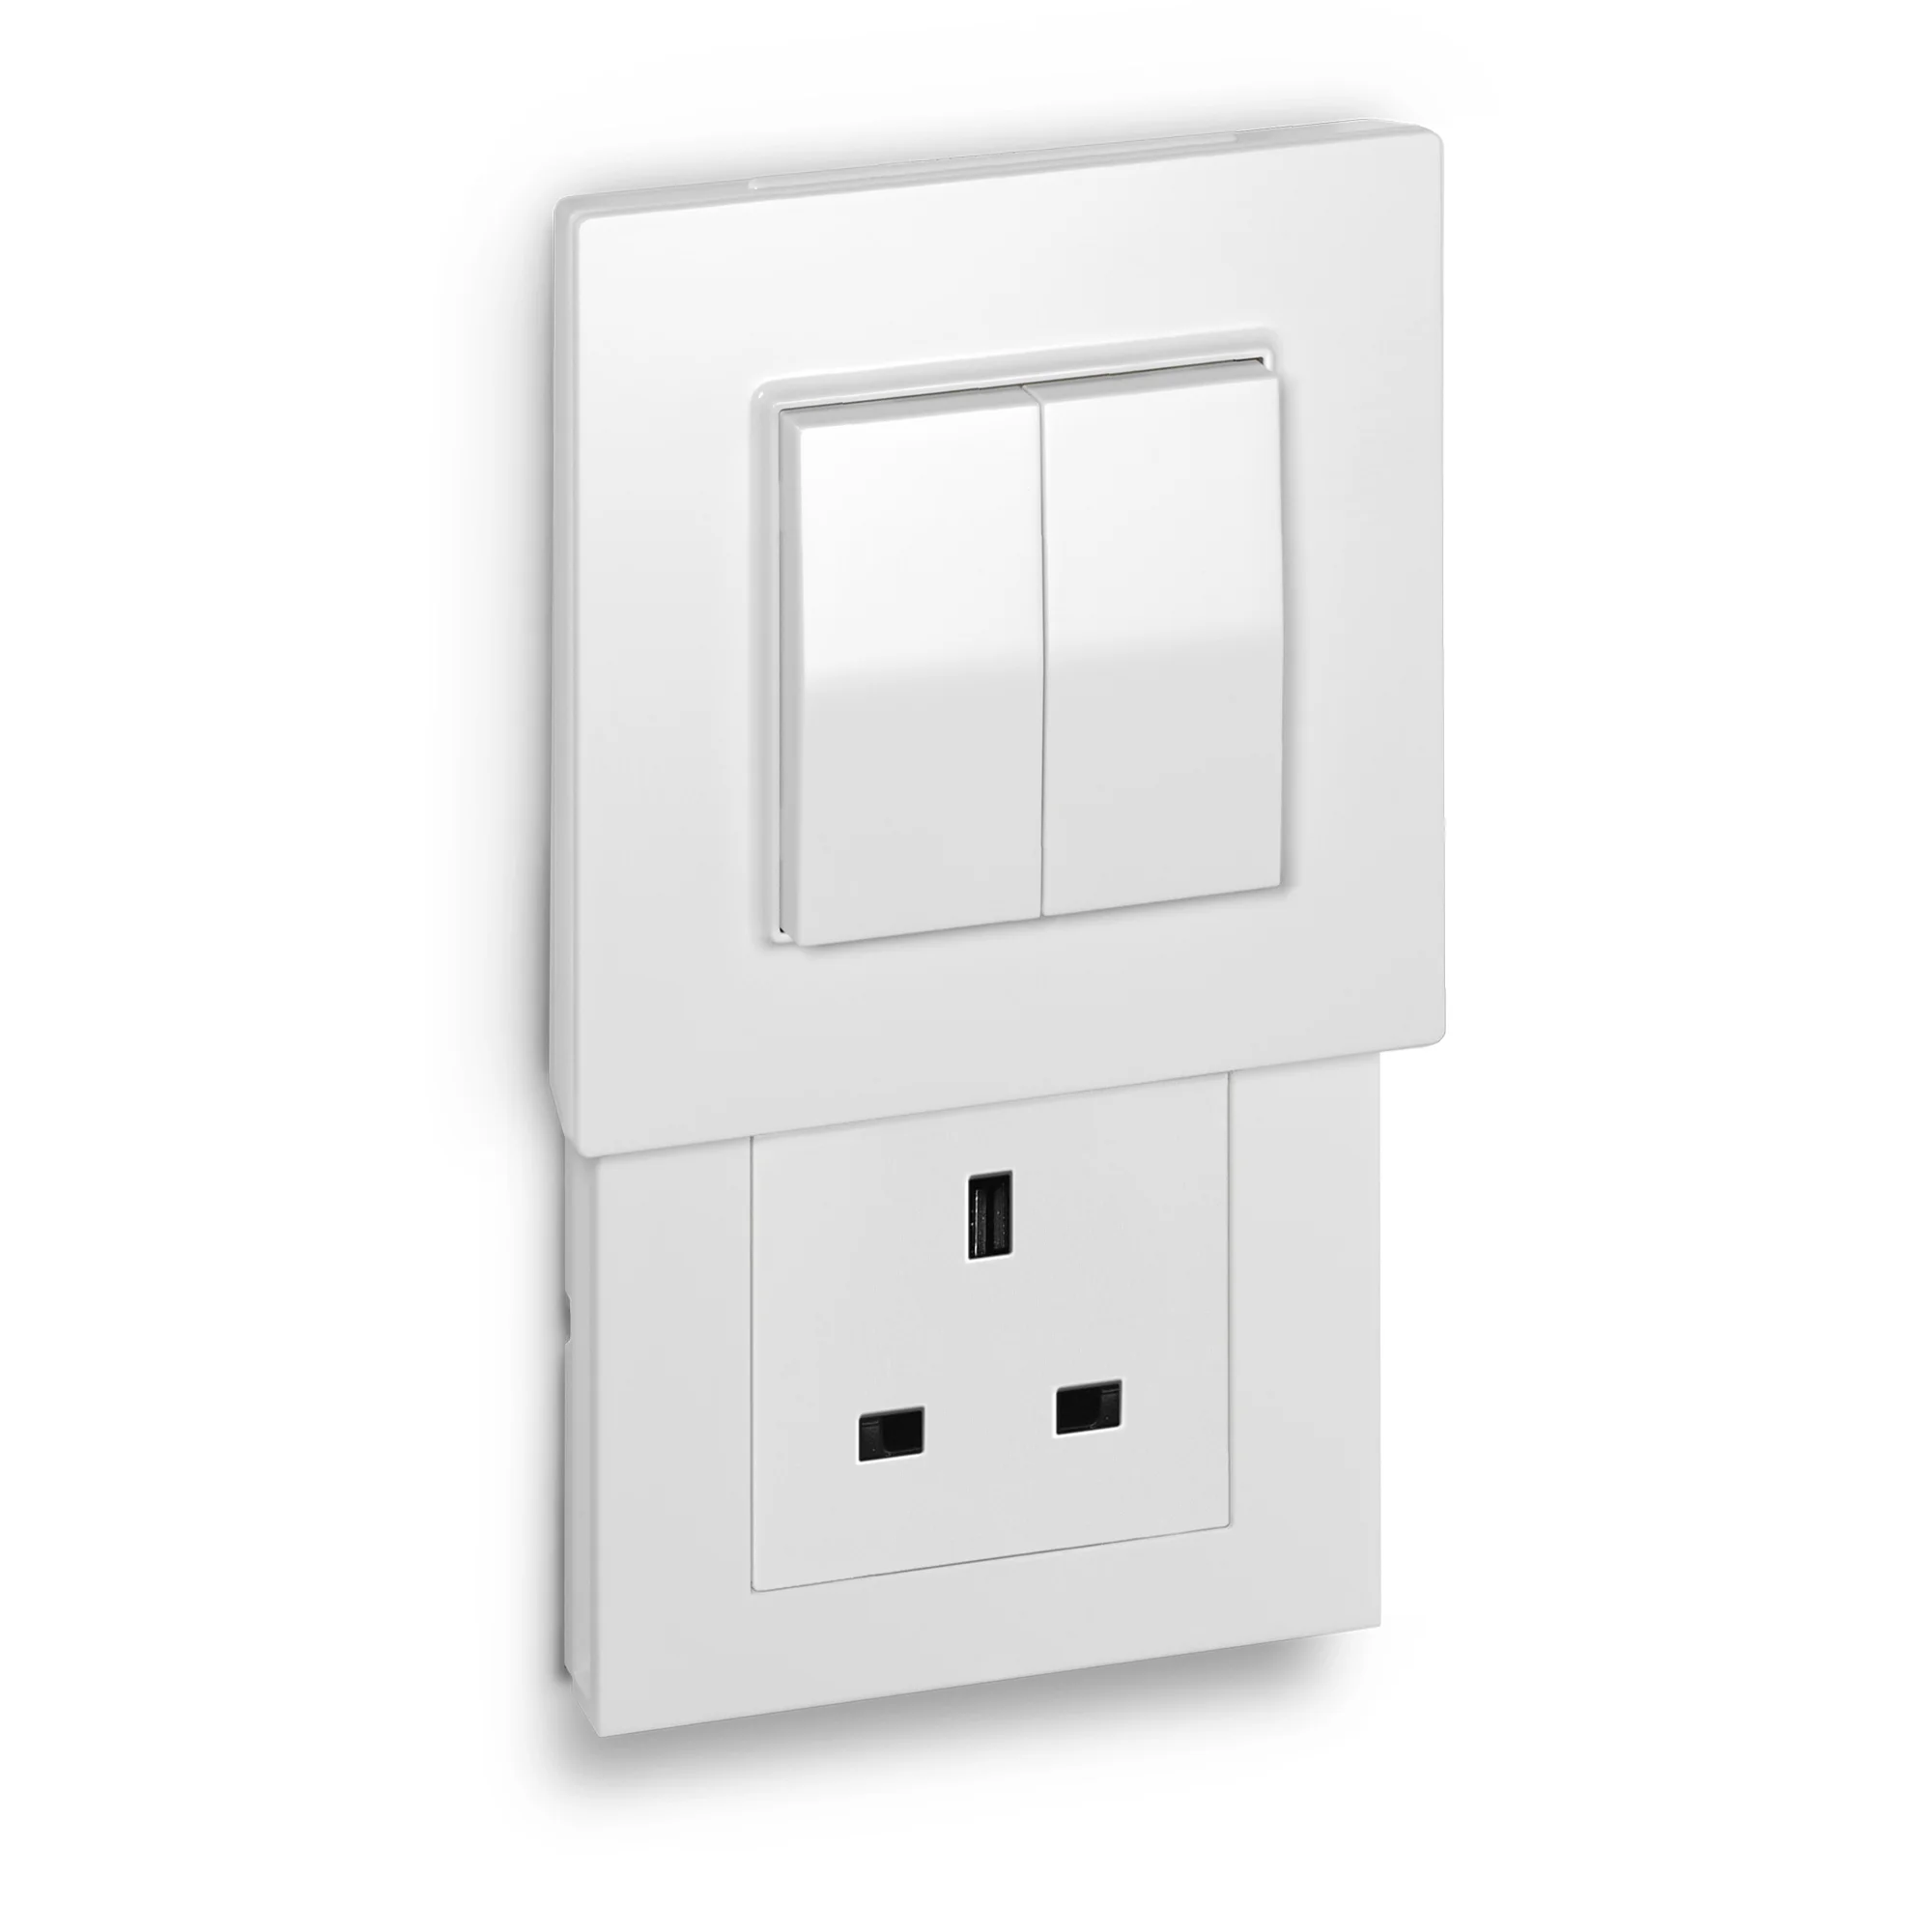 Hidden Socket | Versteckdose® with Casambi switch with socket insert for plug type G (UK)